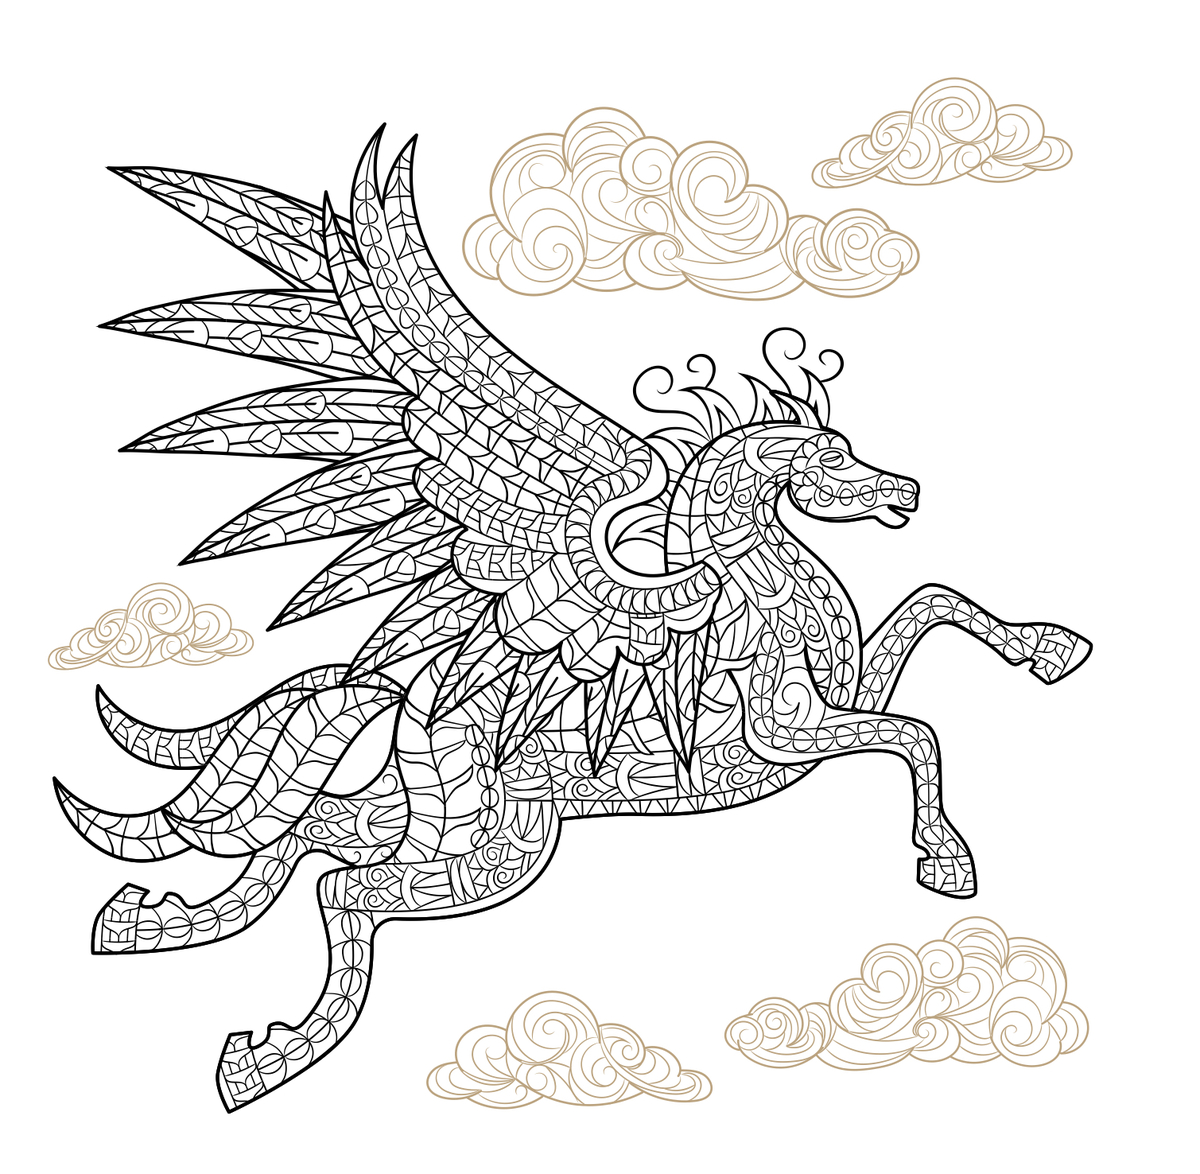 Pegasus Winged Horse Hard Advanced Adult Animal Coloring Page